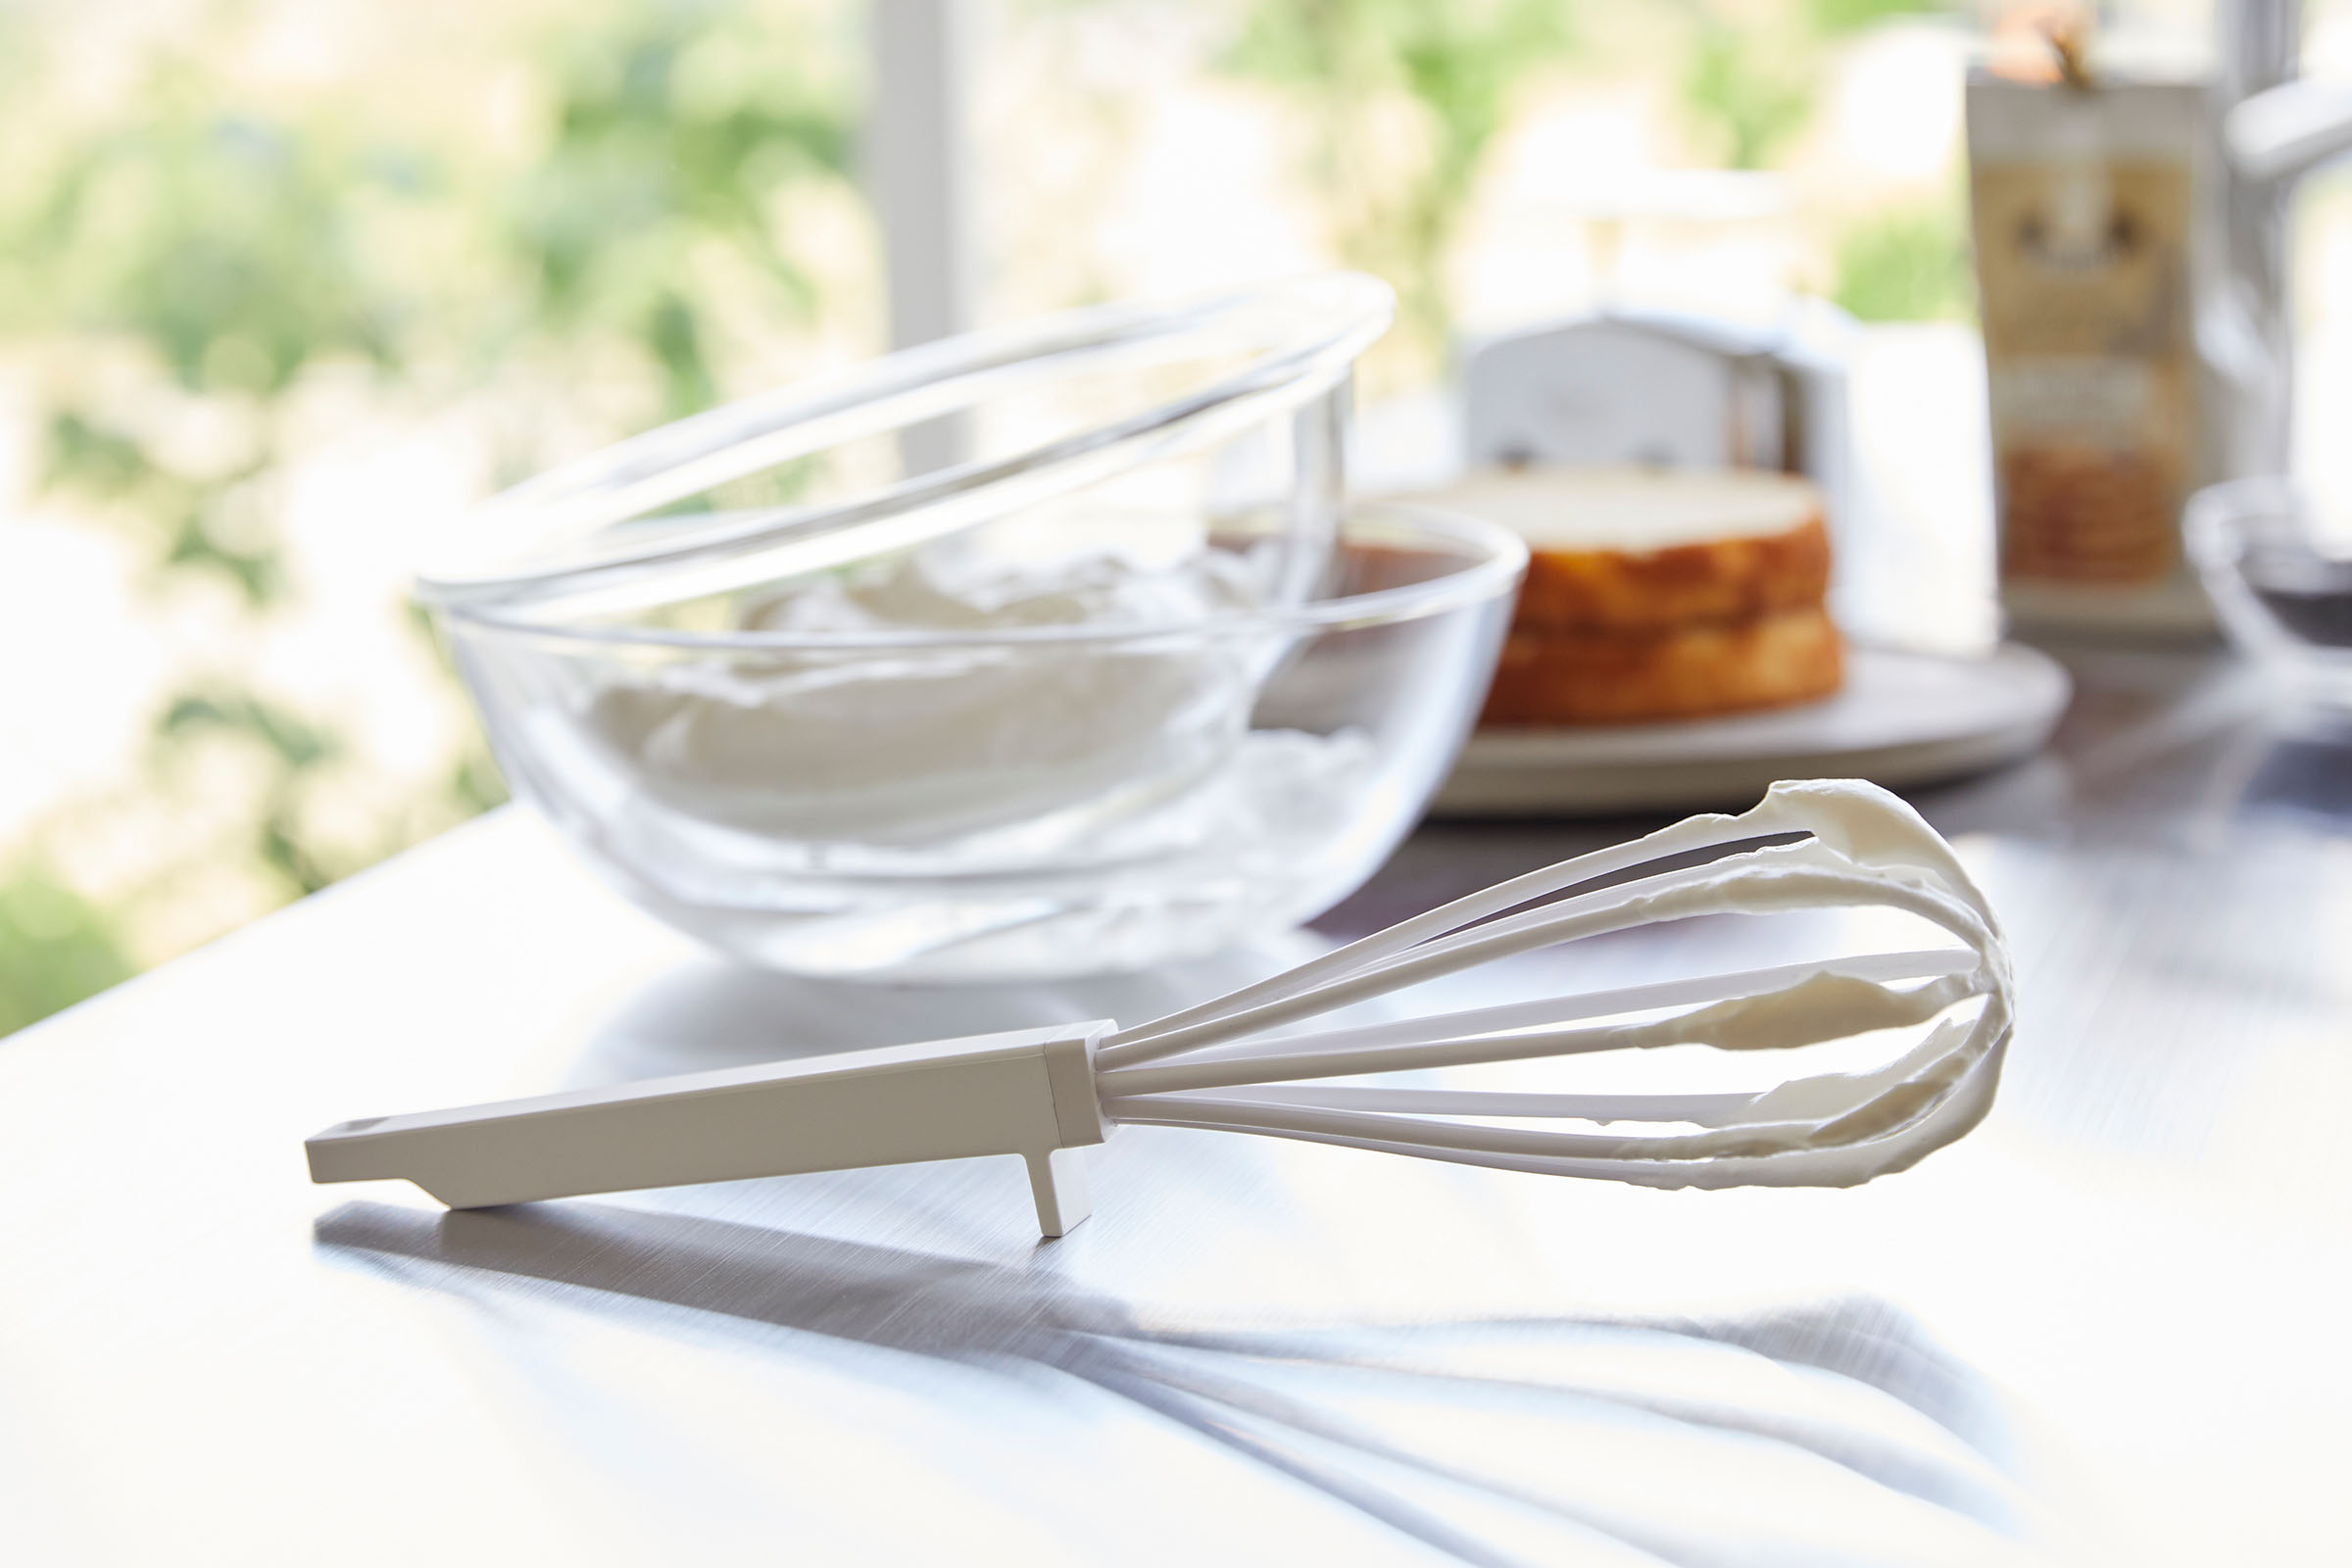 A white Yamazaki Floating whisk with meringue on it resting on a table next to two bowls.